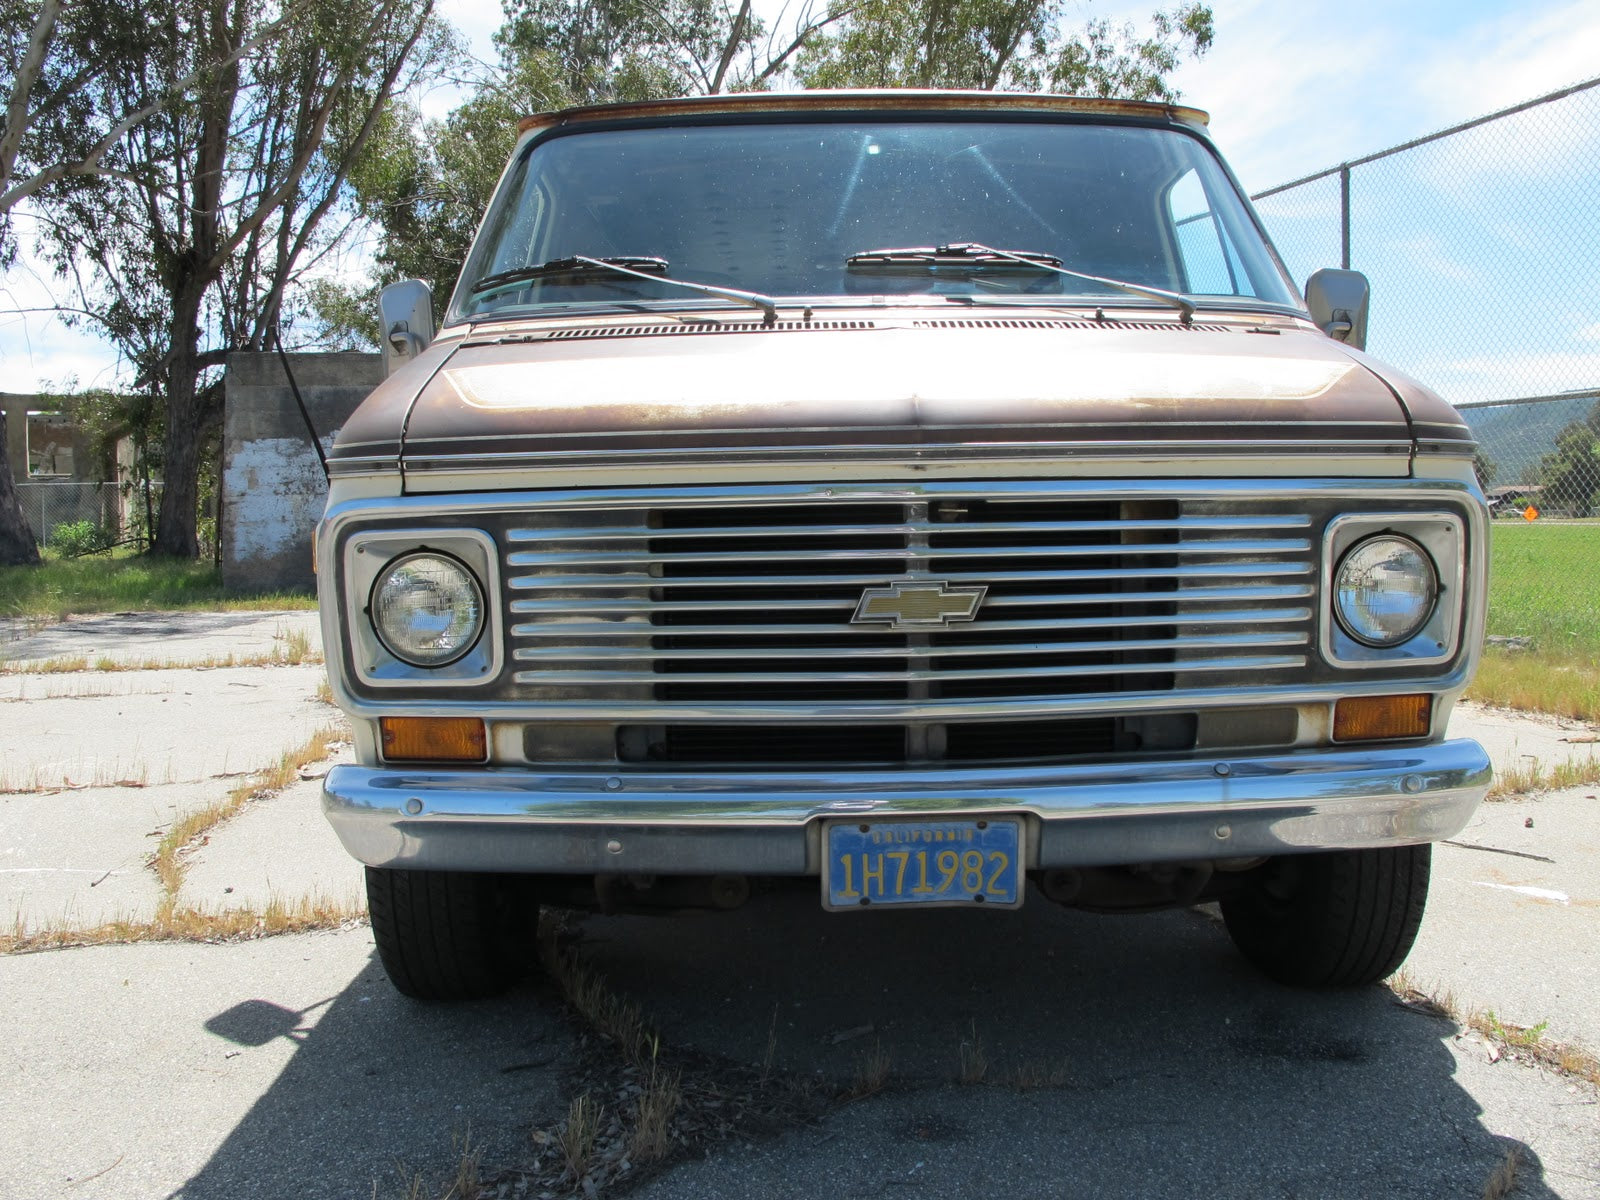 Chevy Shorty Van for Sale, Son